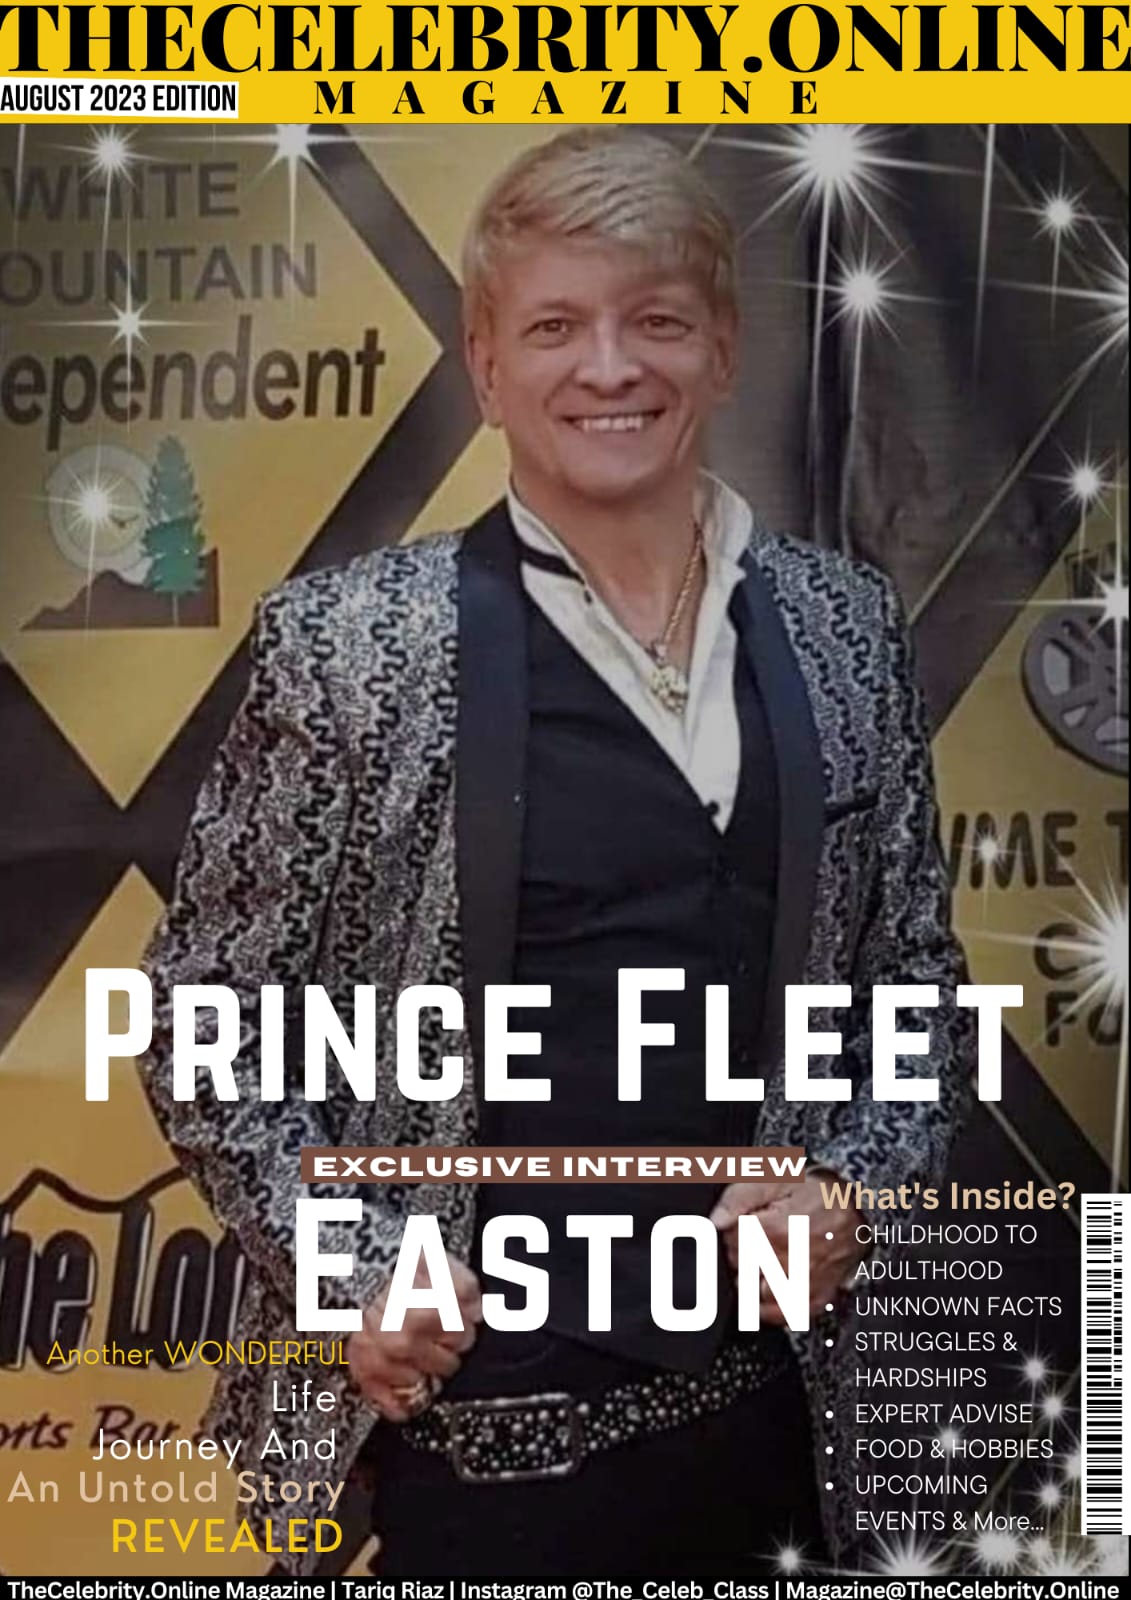 Prince Fleet Easton Exclusive Interview – ‘Follow Your Own Path. Learn All You Can’